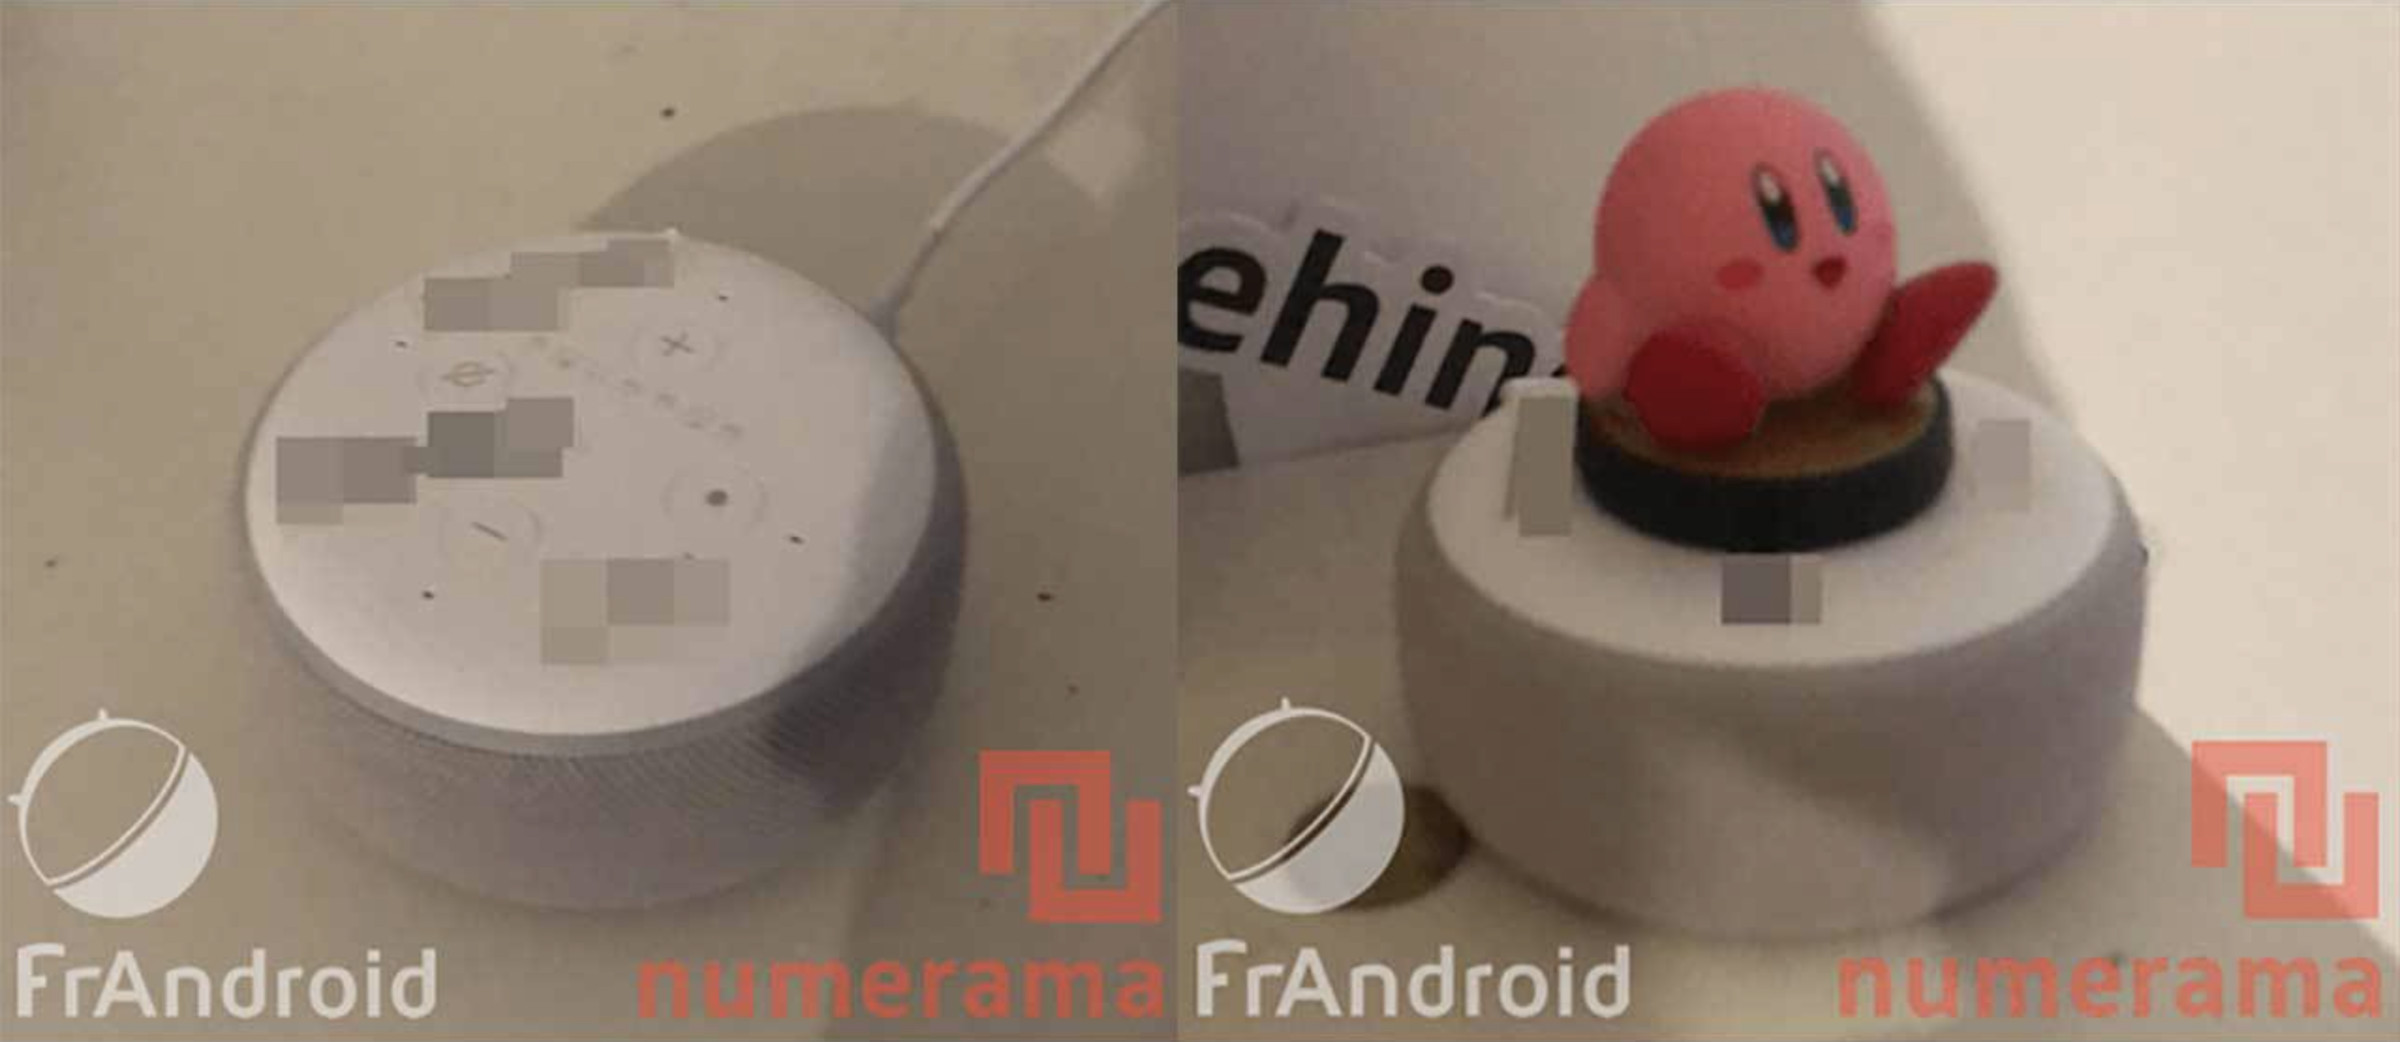 If these images are accurate, Amazon’s next Echo Dot will have a more rounded design with fabric running around the side. 